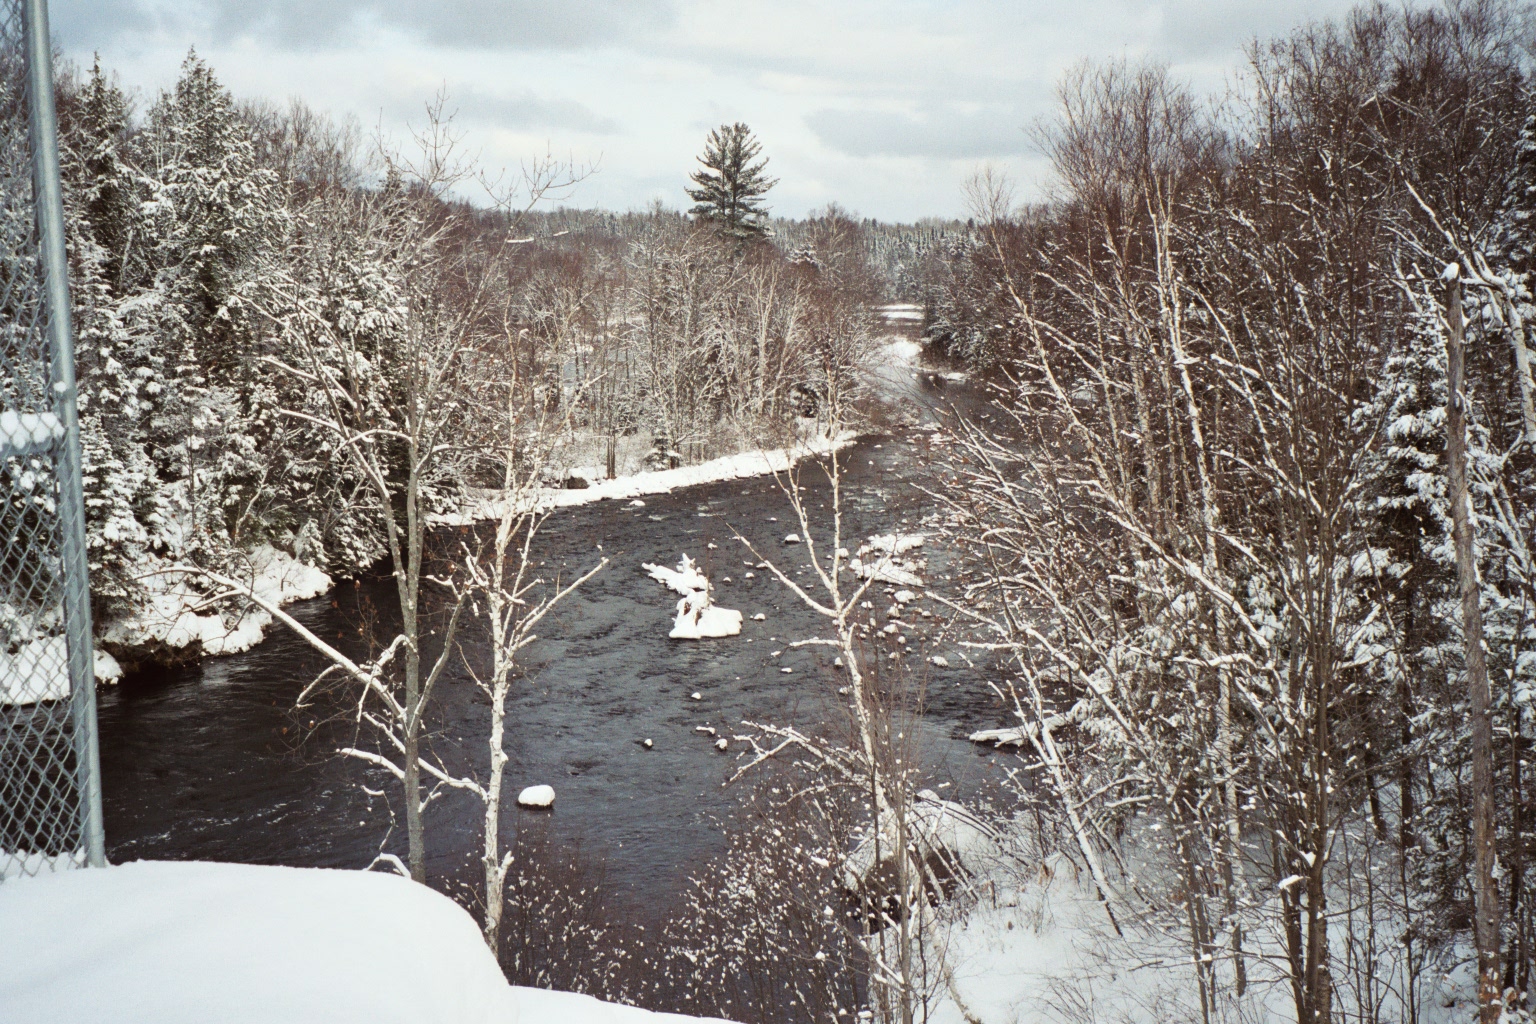 Photograph of snow and river ice along the Indian River near Indian Lake, NY (INDN6) looking downstream